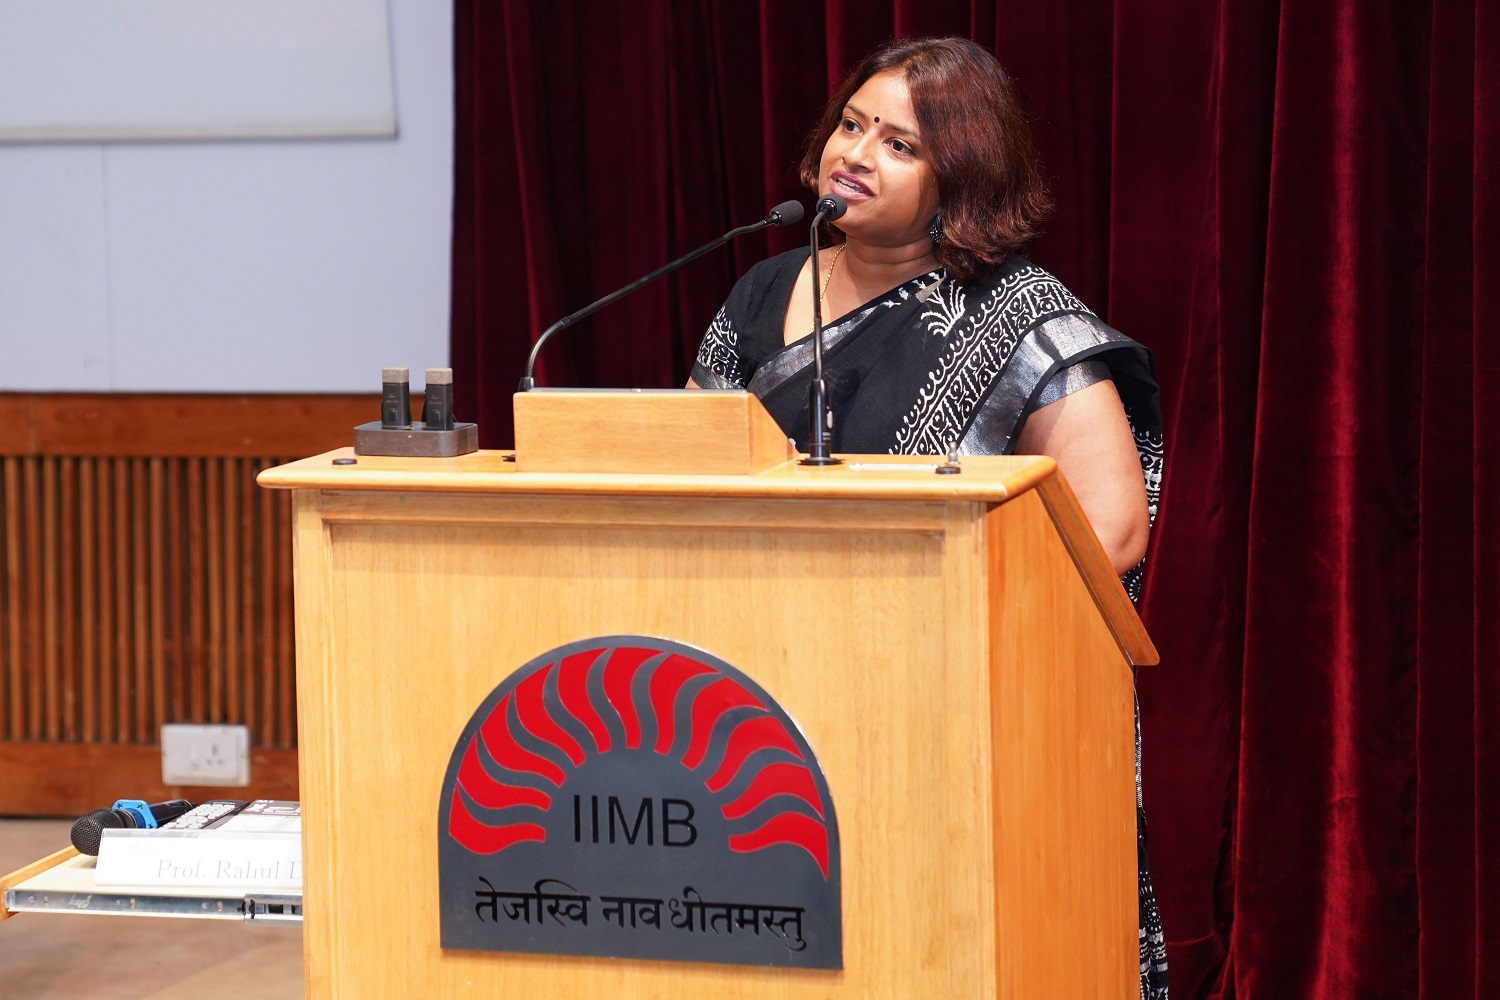 Chief Guests Mekhala Govinda, Services Director,  Dassault Systemes, delivers the special address, highlighting her own IIMB journey. 